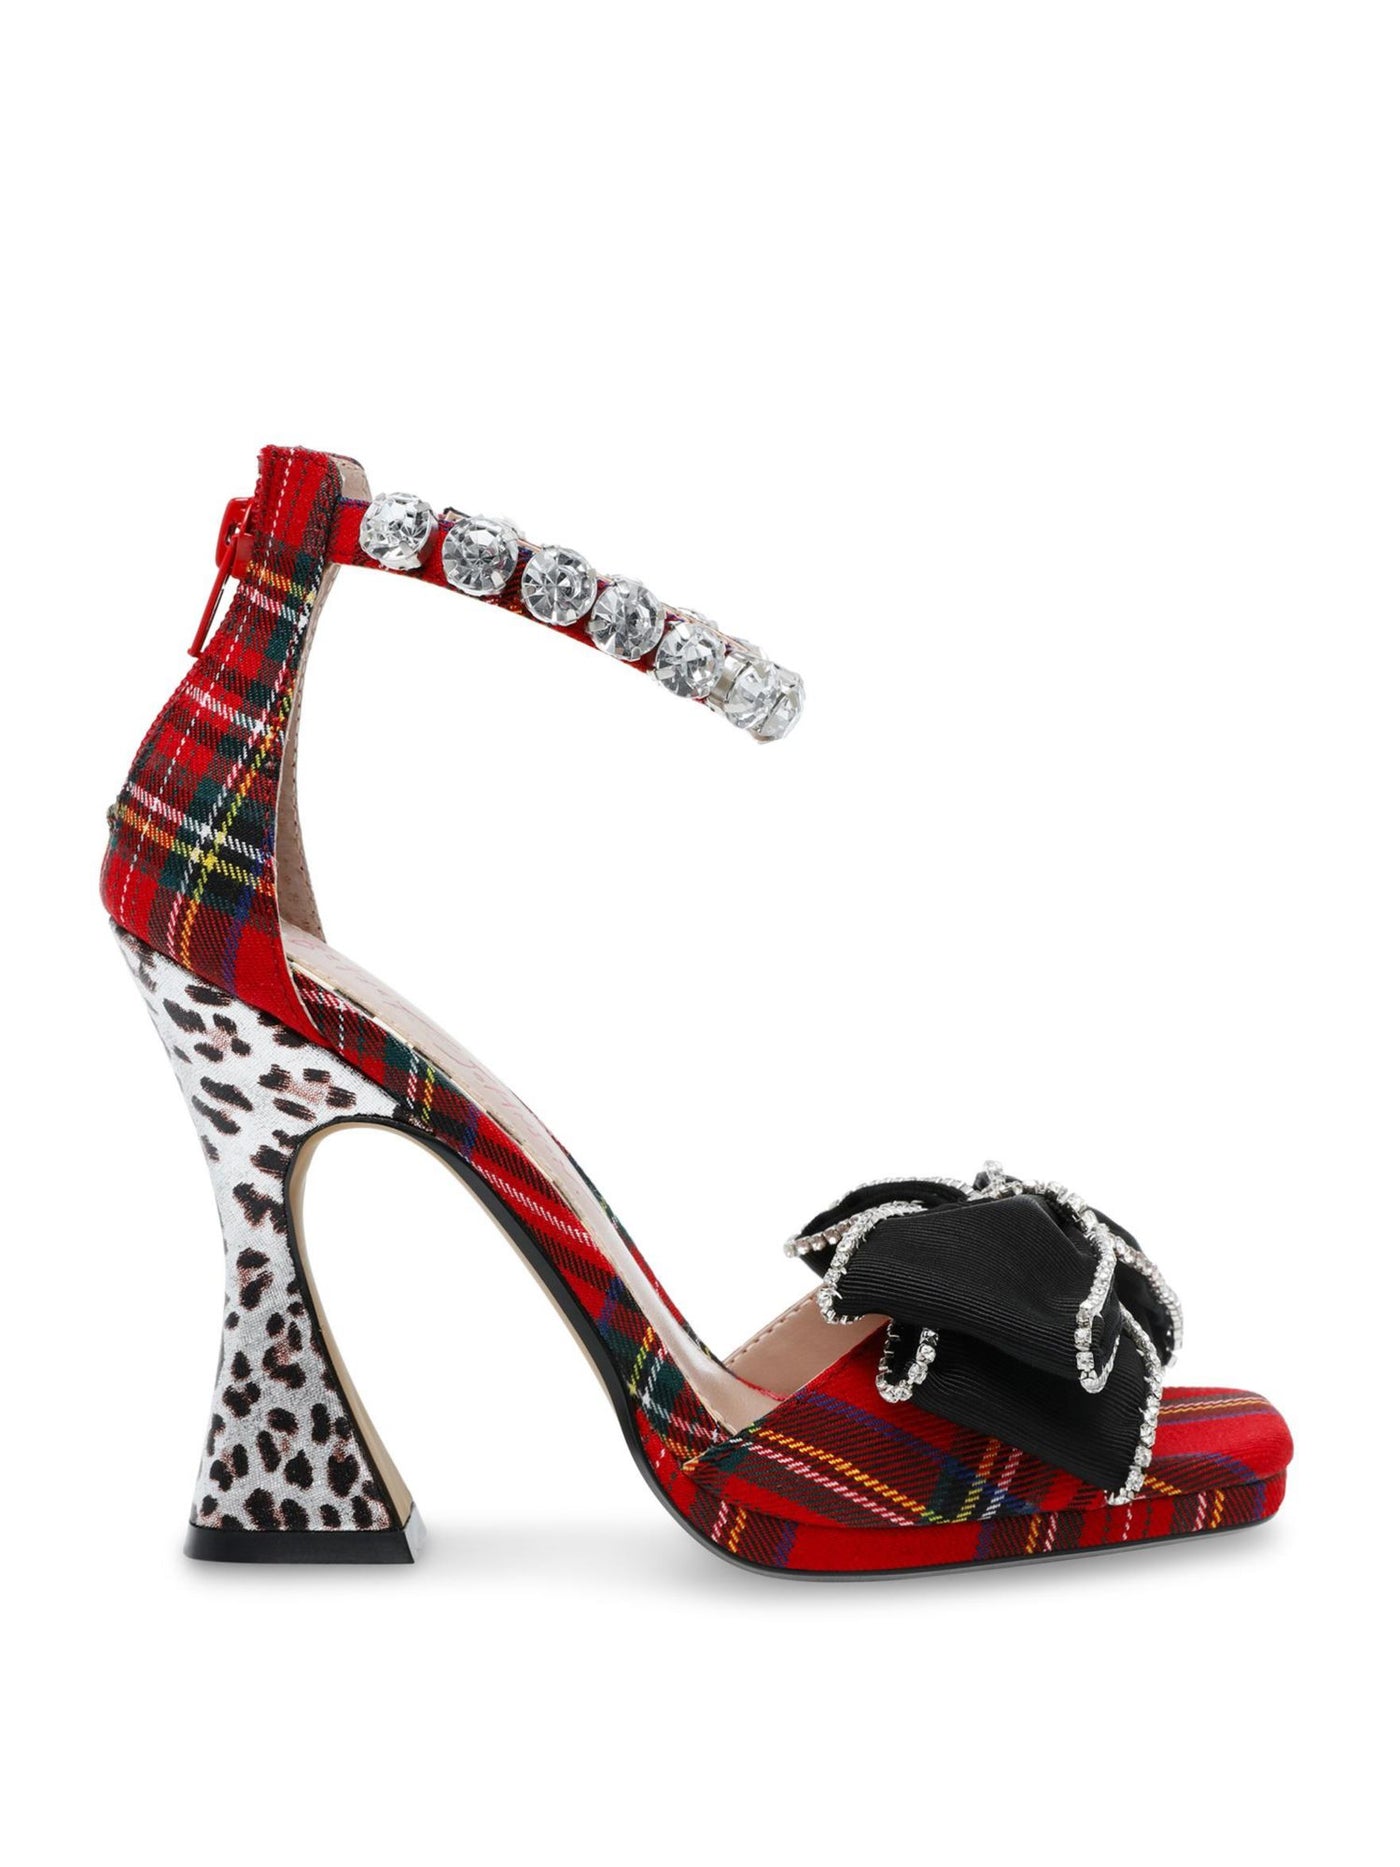 BETSEY JOHNSON Womens Red Plaid Padded Ankle Strap Bow Accent Embellished Guliana Square Toe Sculpted Heel Zip-Up Dress Heeled Sandal 11 M